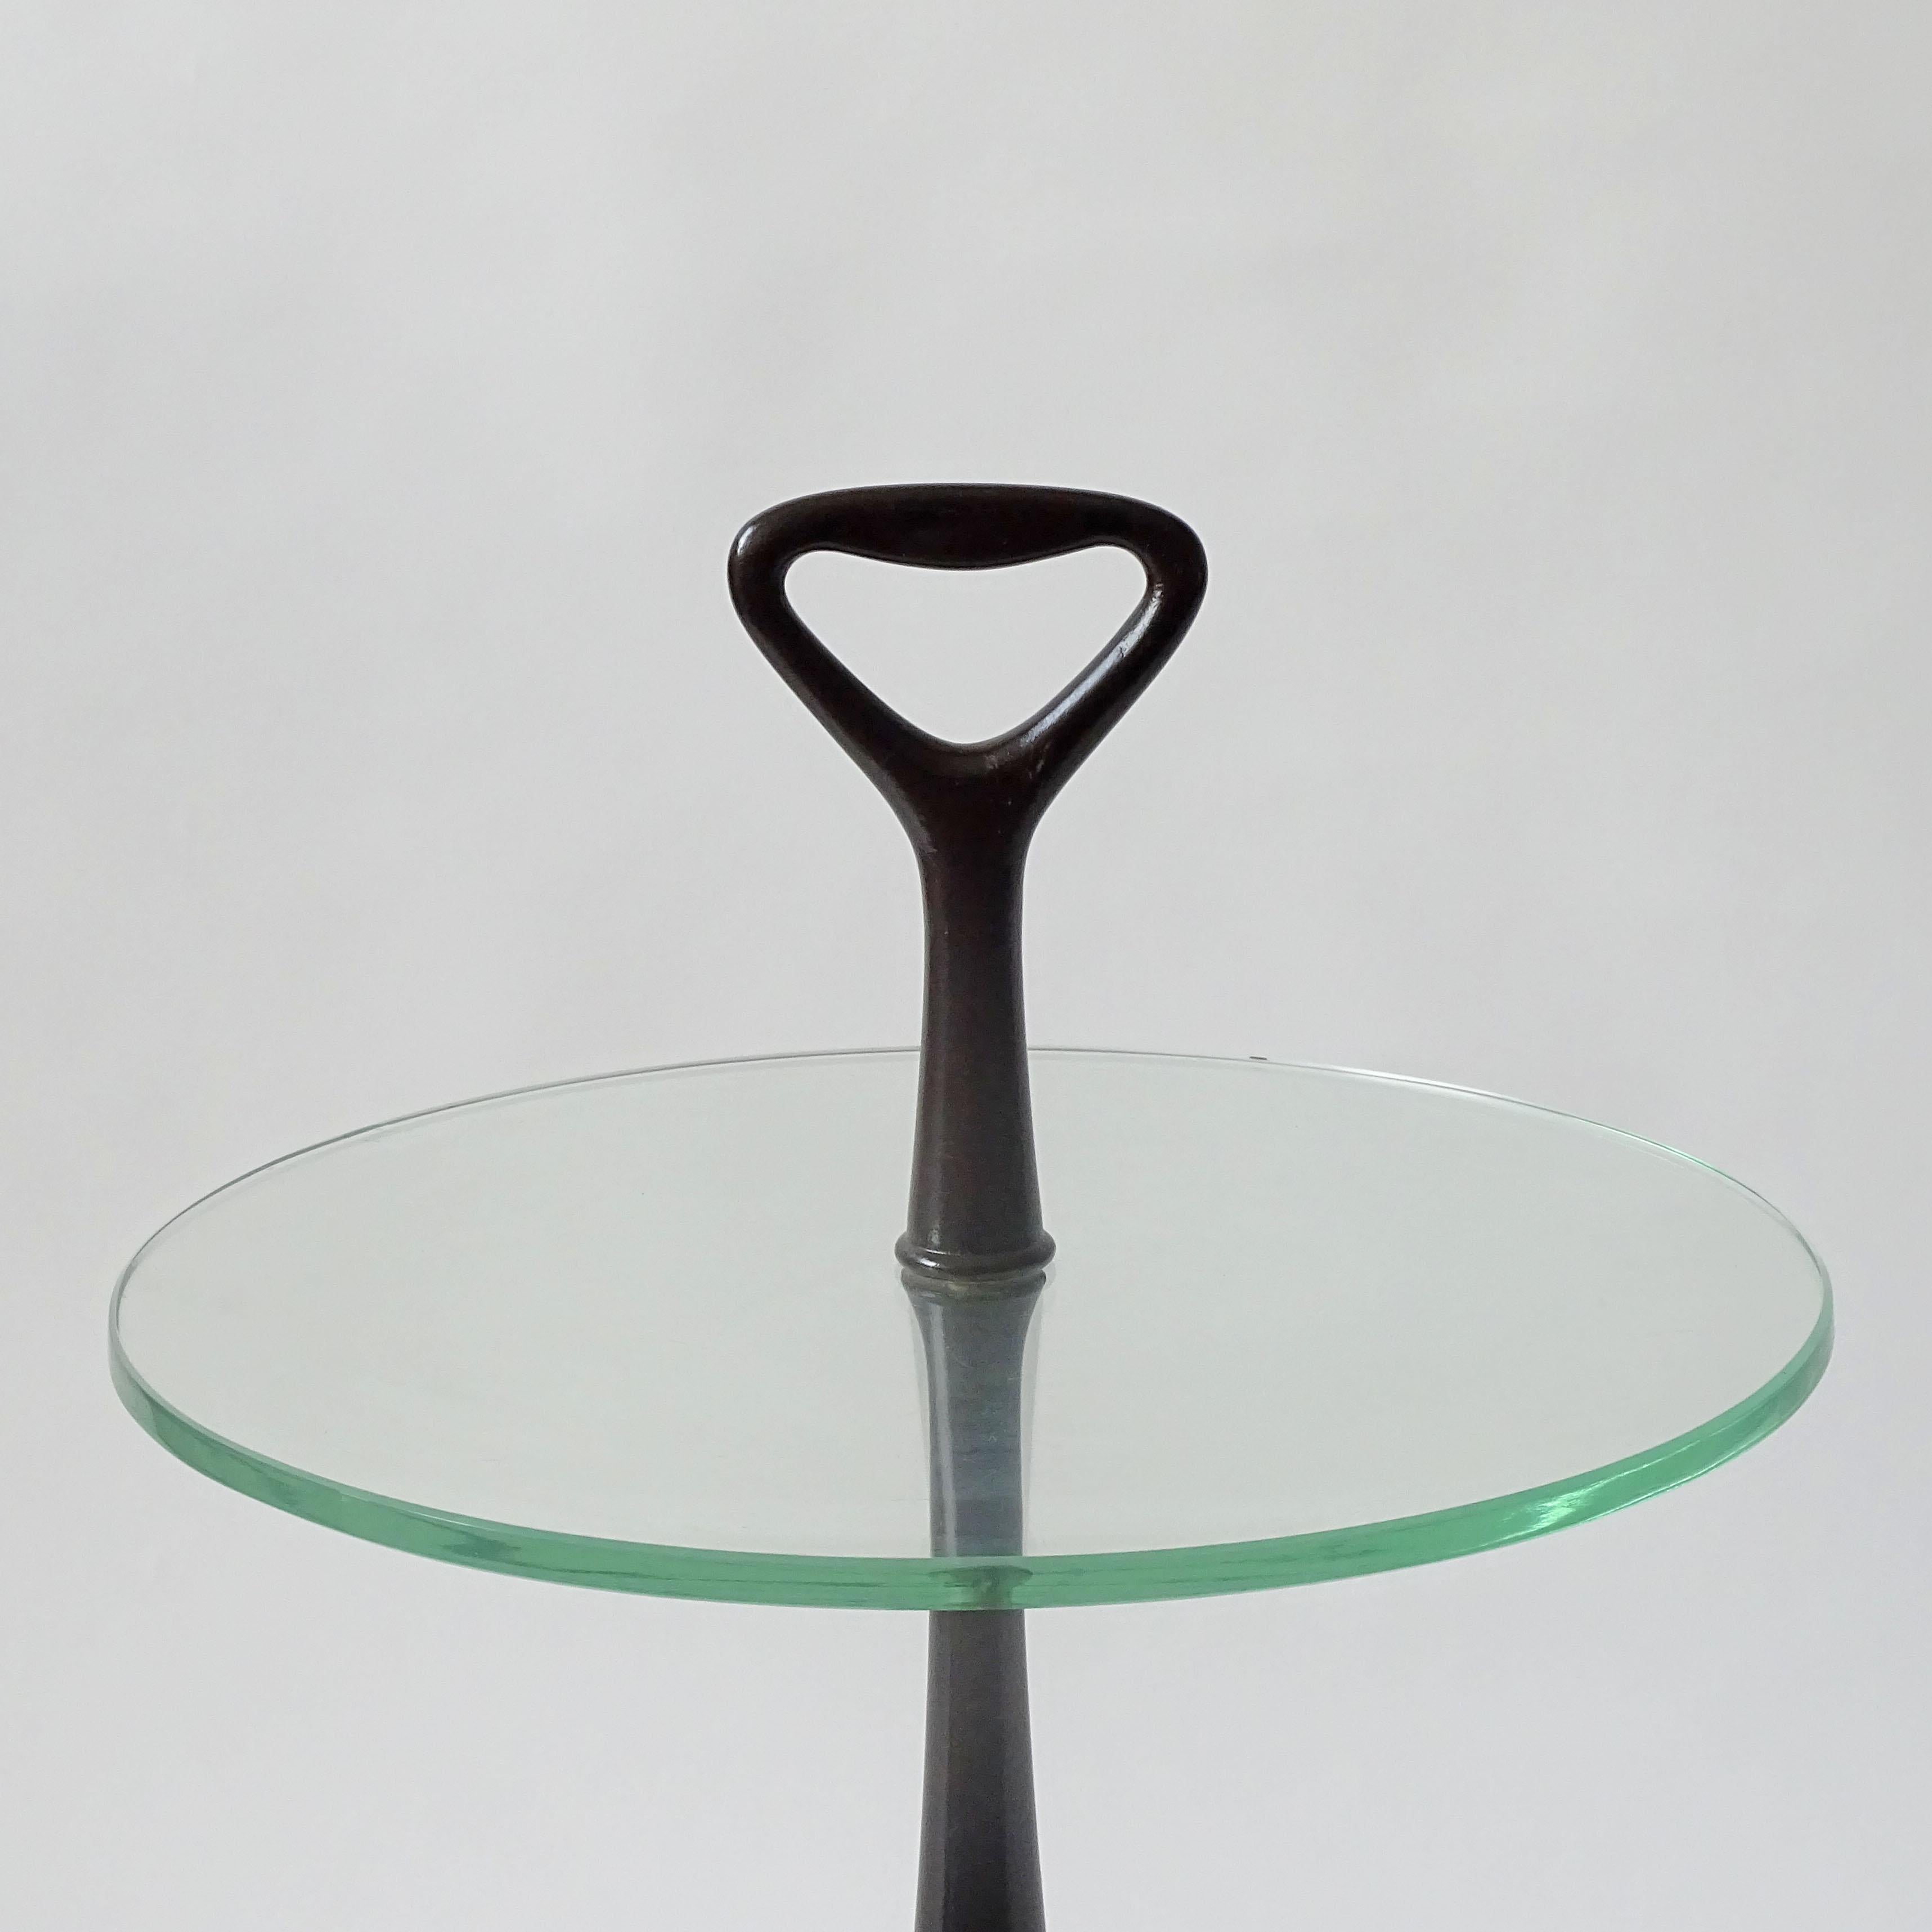 Splendid Paolo Buffa Gueridon in dark lacquered wood and glass
Using the handle, the table can be easily moved around the room.
Table top height 43 cm